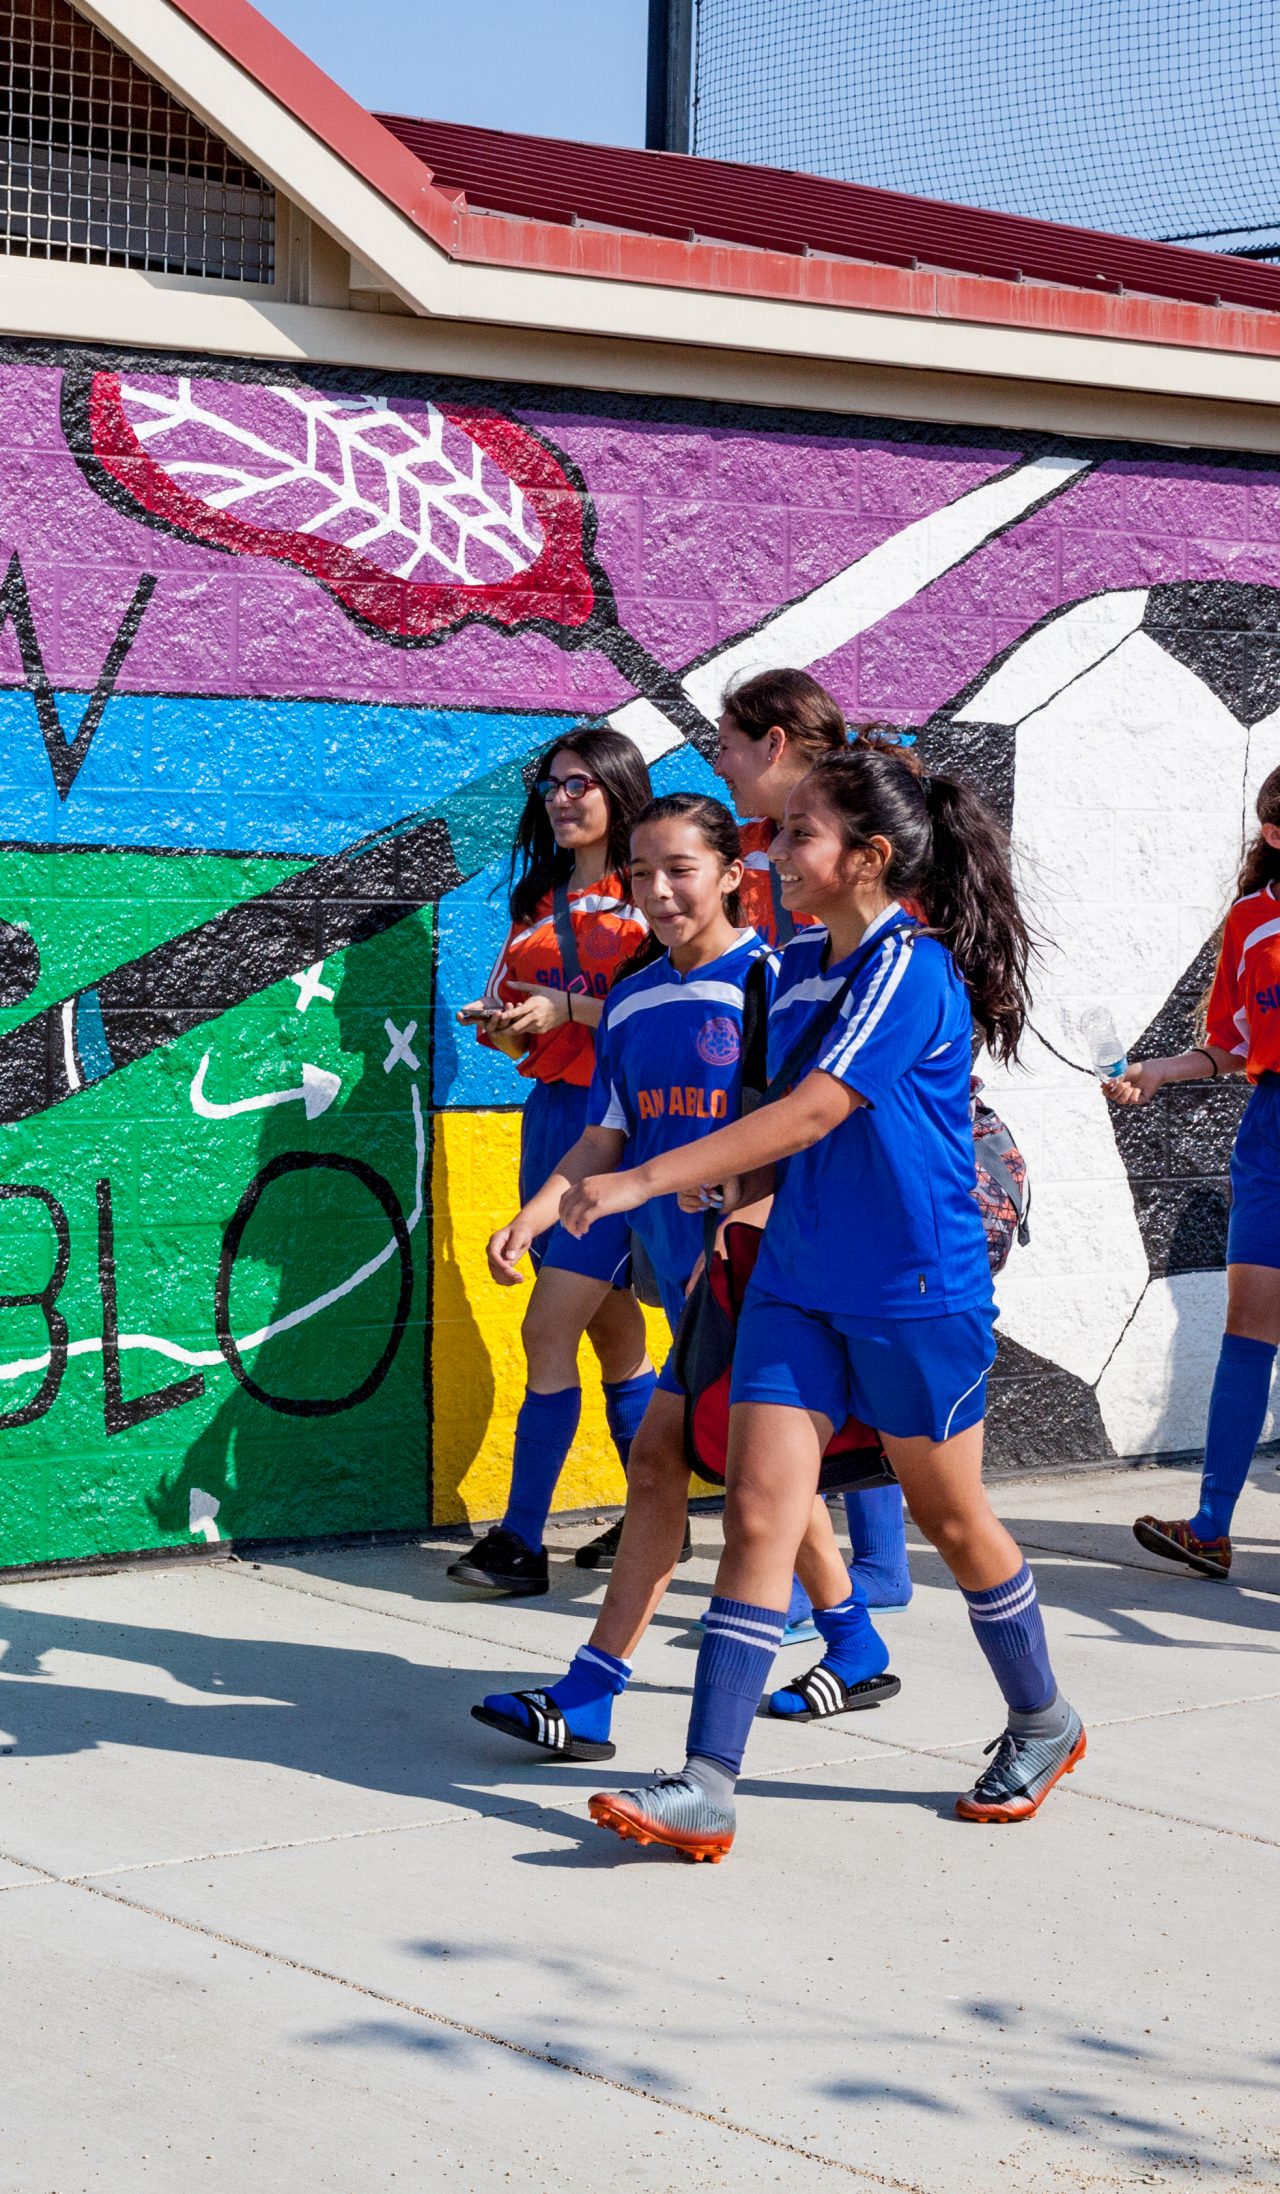 Mural with youth soccer players at Rumrill Sports Park. At the new Rumrill Sports Park in an industrial part of San Pablo, soccer teams face off on three new fields with artificial turf and field lights. San Pablo has the highest childhood obesity rate in the county — but the least amount of park and open space. The city and San Pablo Economic Development Corp. worked with federal and state agencies to rehabilitate vacant railroad land, then raised funds through the federal New Market Tax Credit program to build state-of-the-art fields. “We did not have a safe, lit, lined, turfed field anywhere around here. The nearest one is in Berkeley,” says Leslay Choy, general manager of the San Pablo Economic Development Corp.